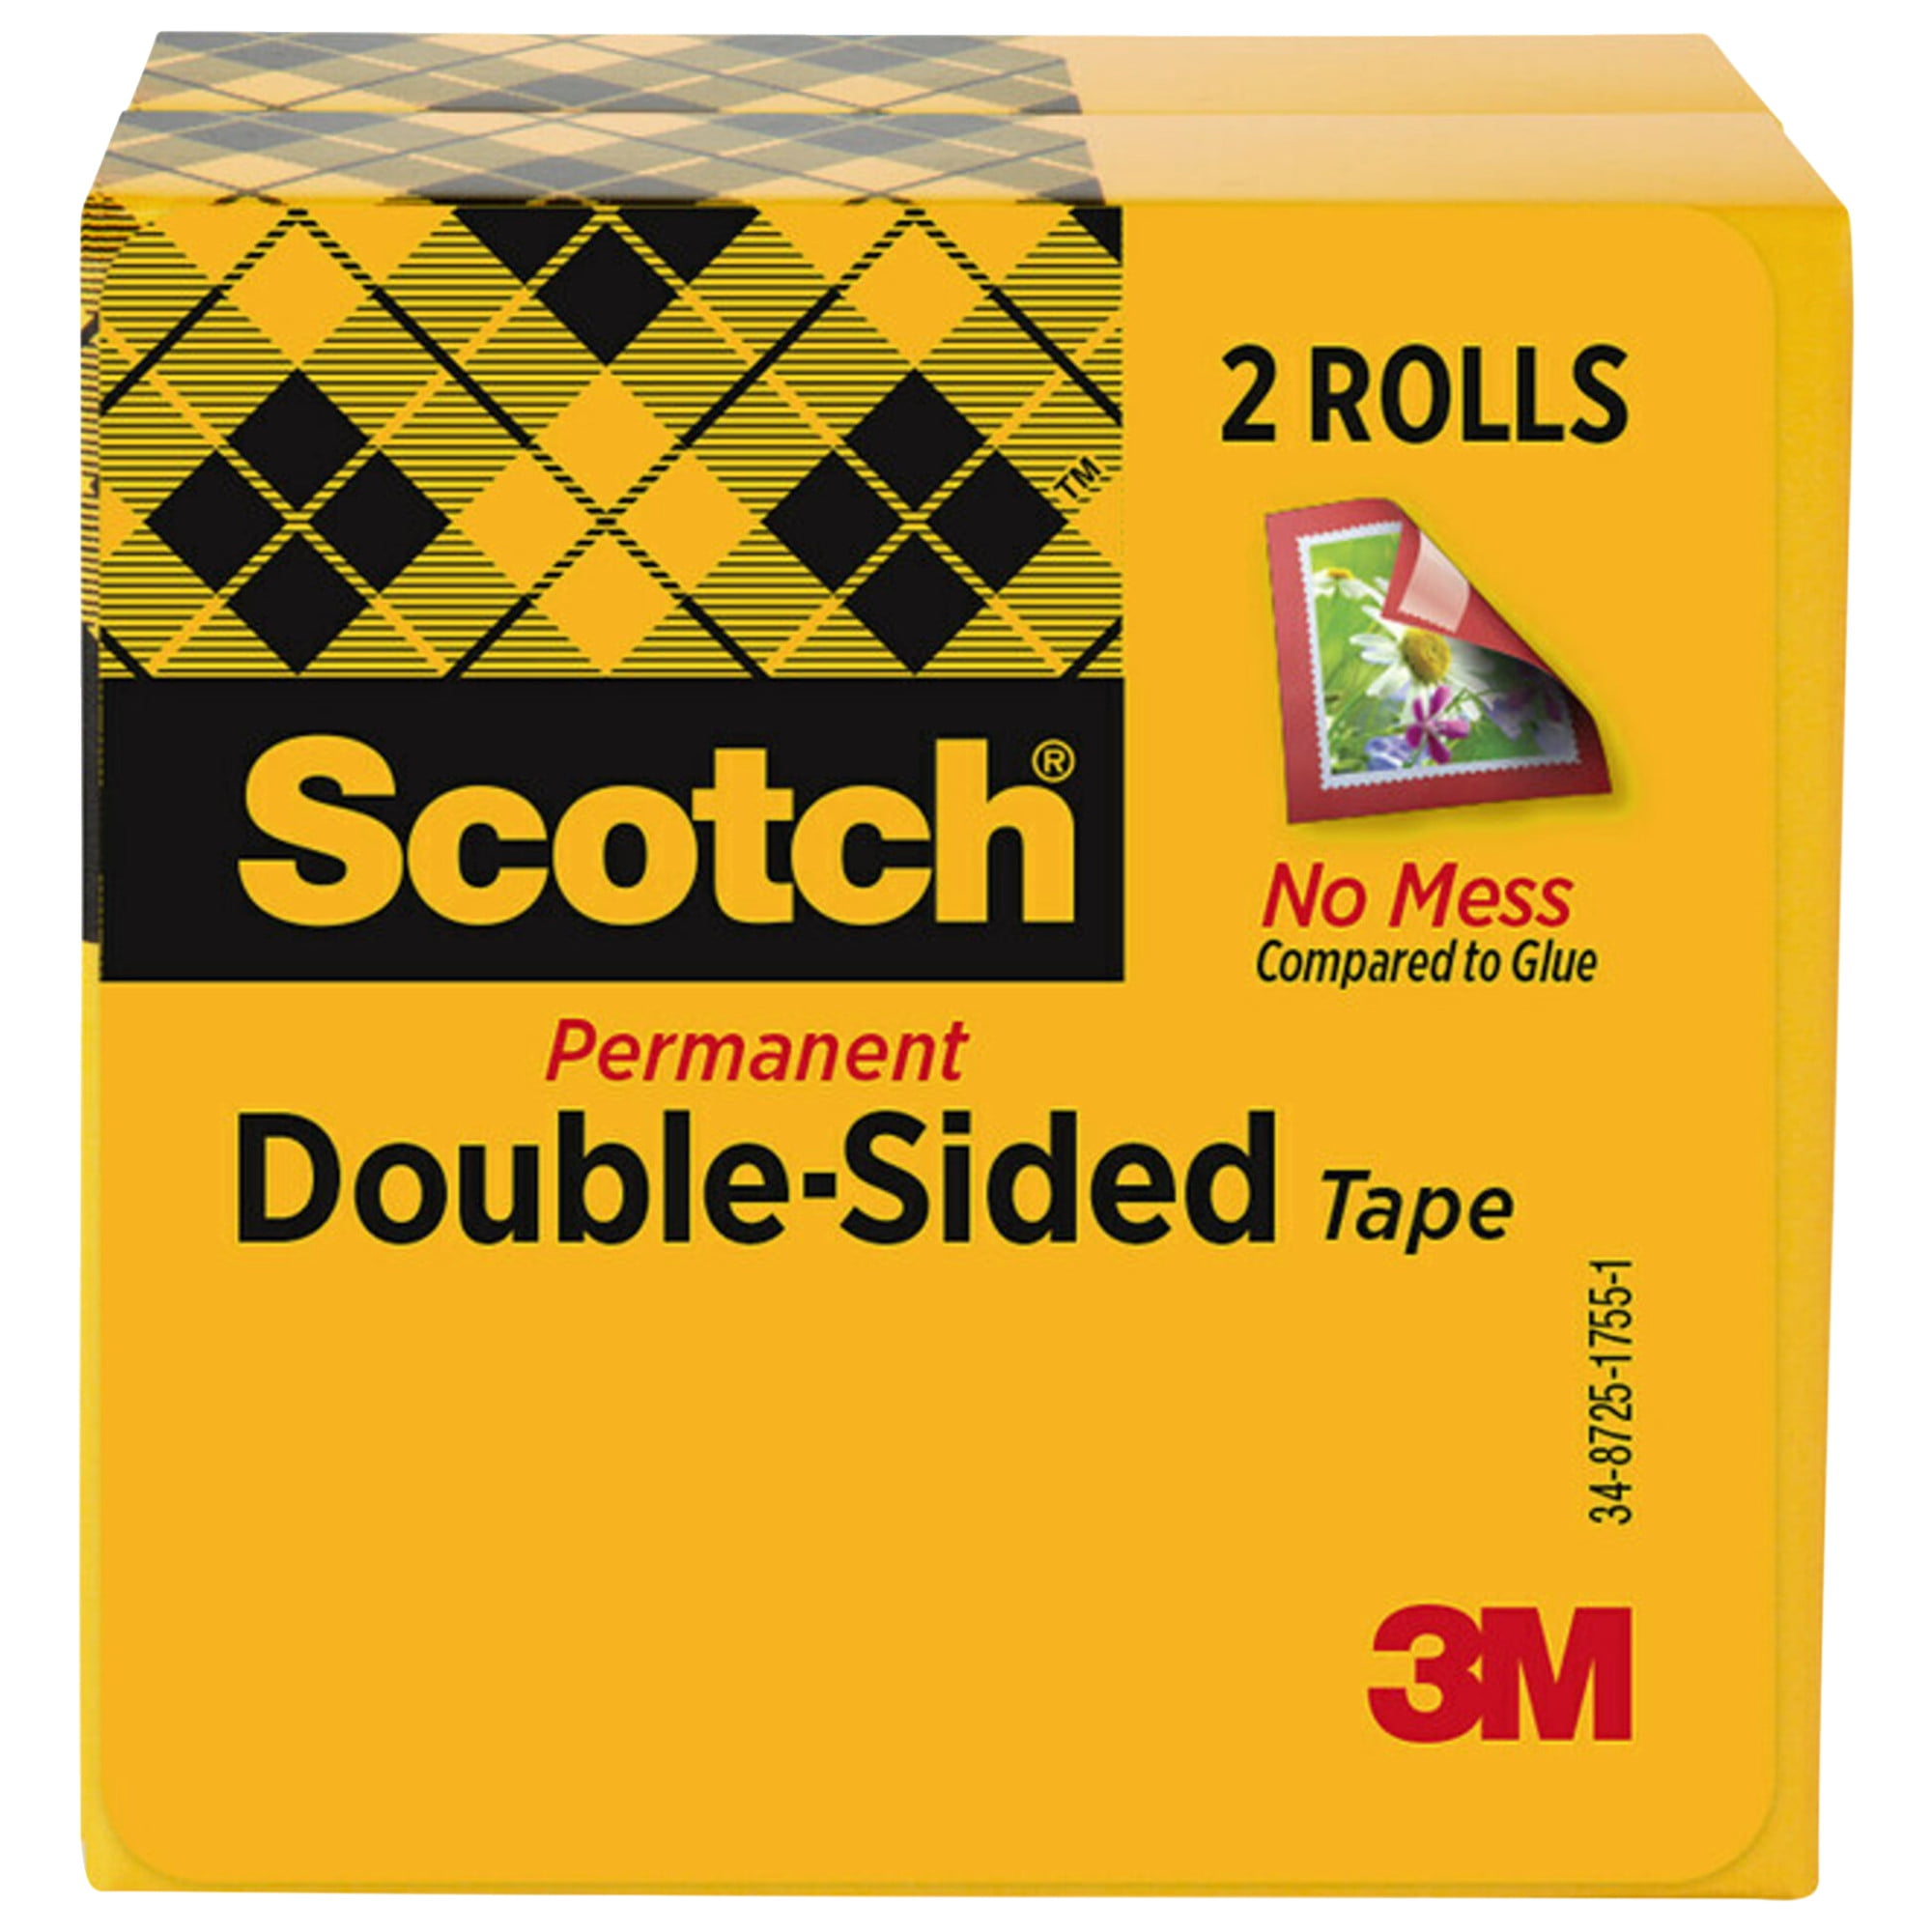 ProTape 6656 2 Masking Tape Yellow 48mm (2 Inch) x 55mm (60 Yards) Roll